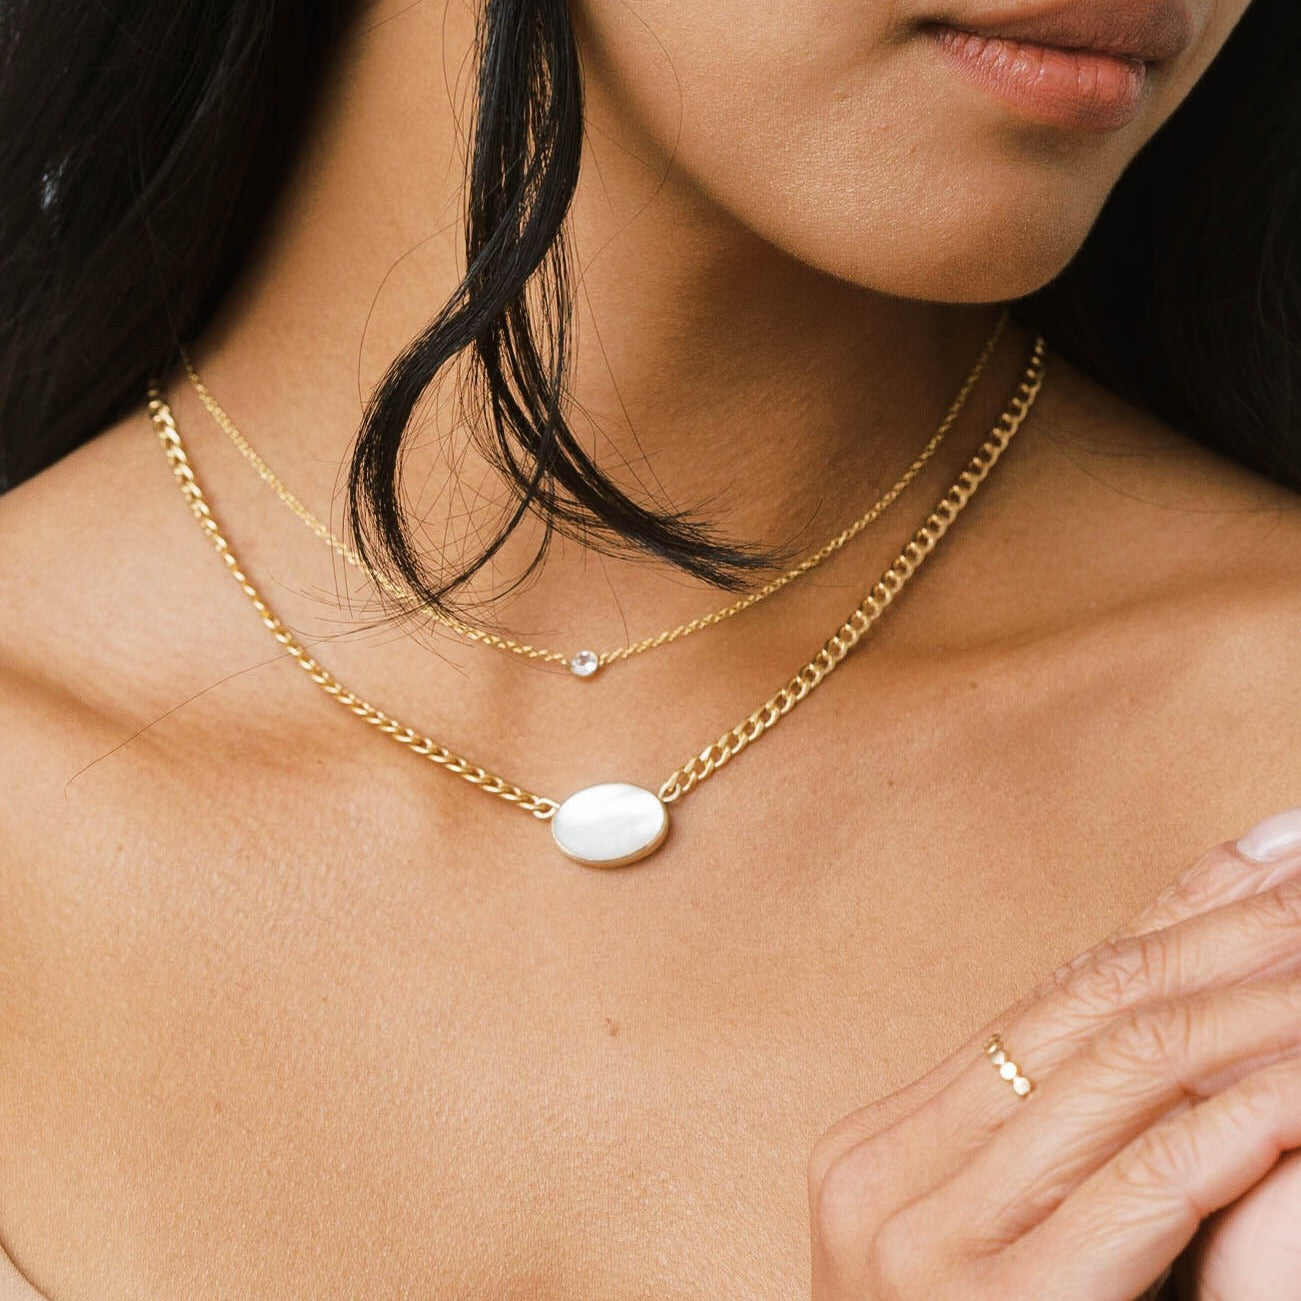 Thick gold chain necklace with a pearl pendant layered with a thin necklace with white topaz pendant.